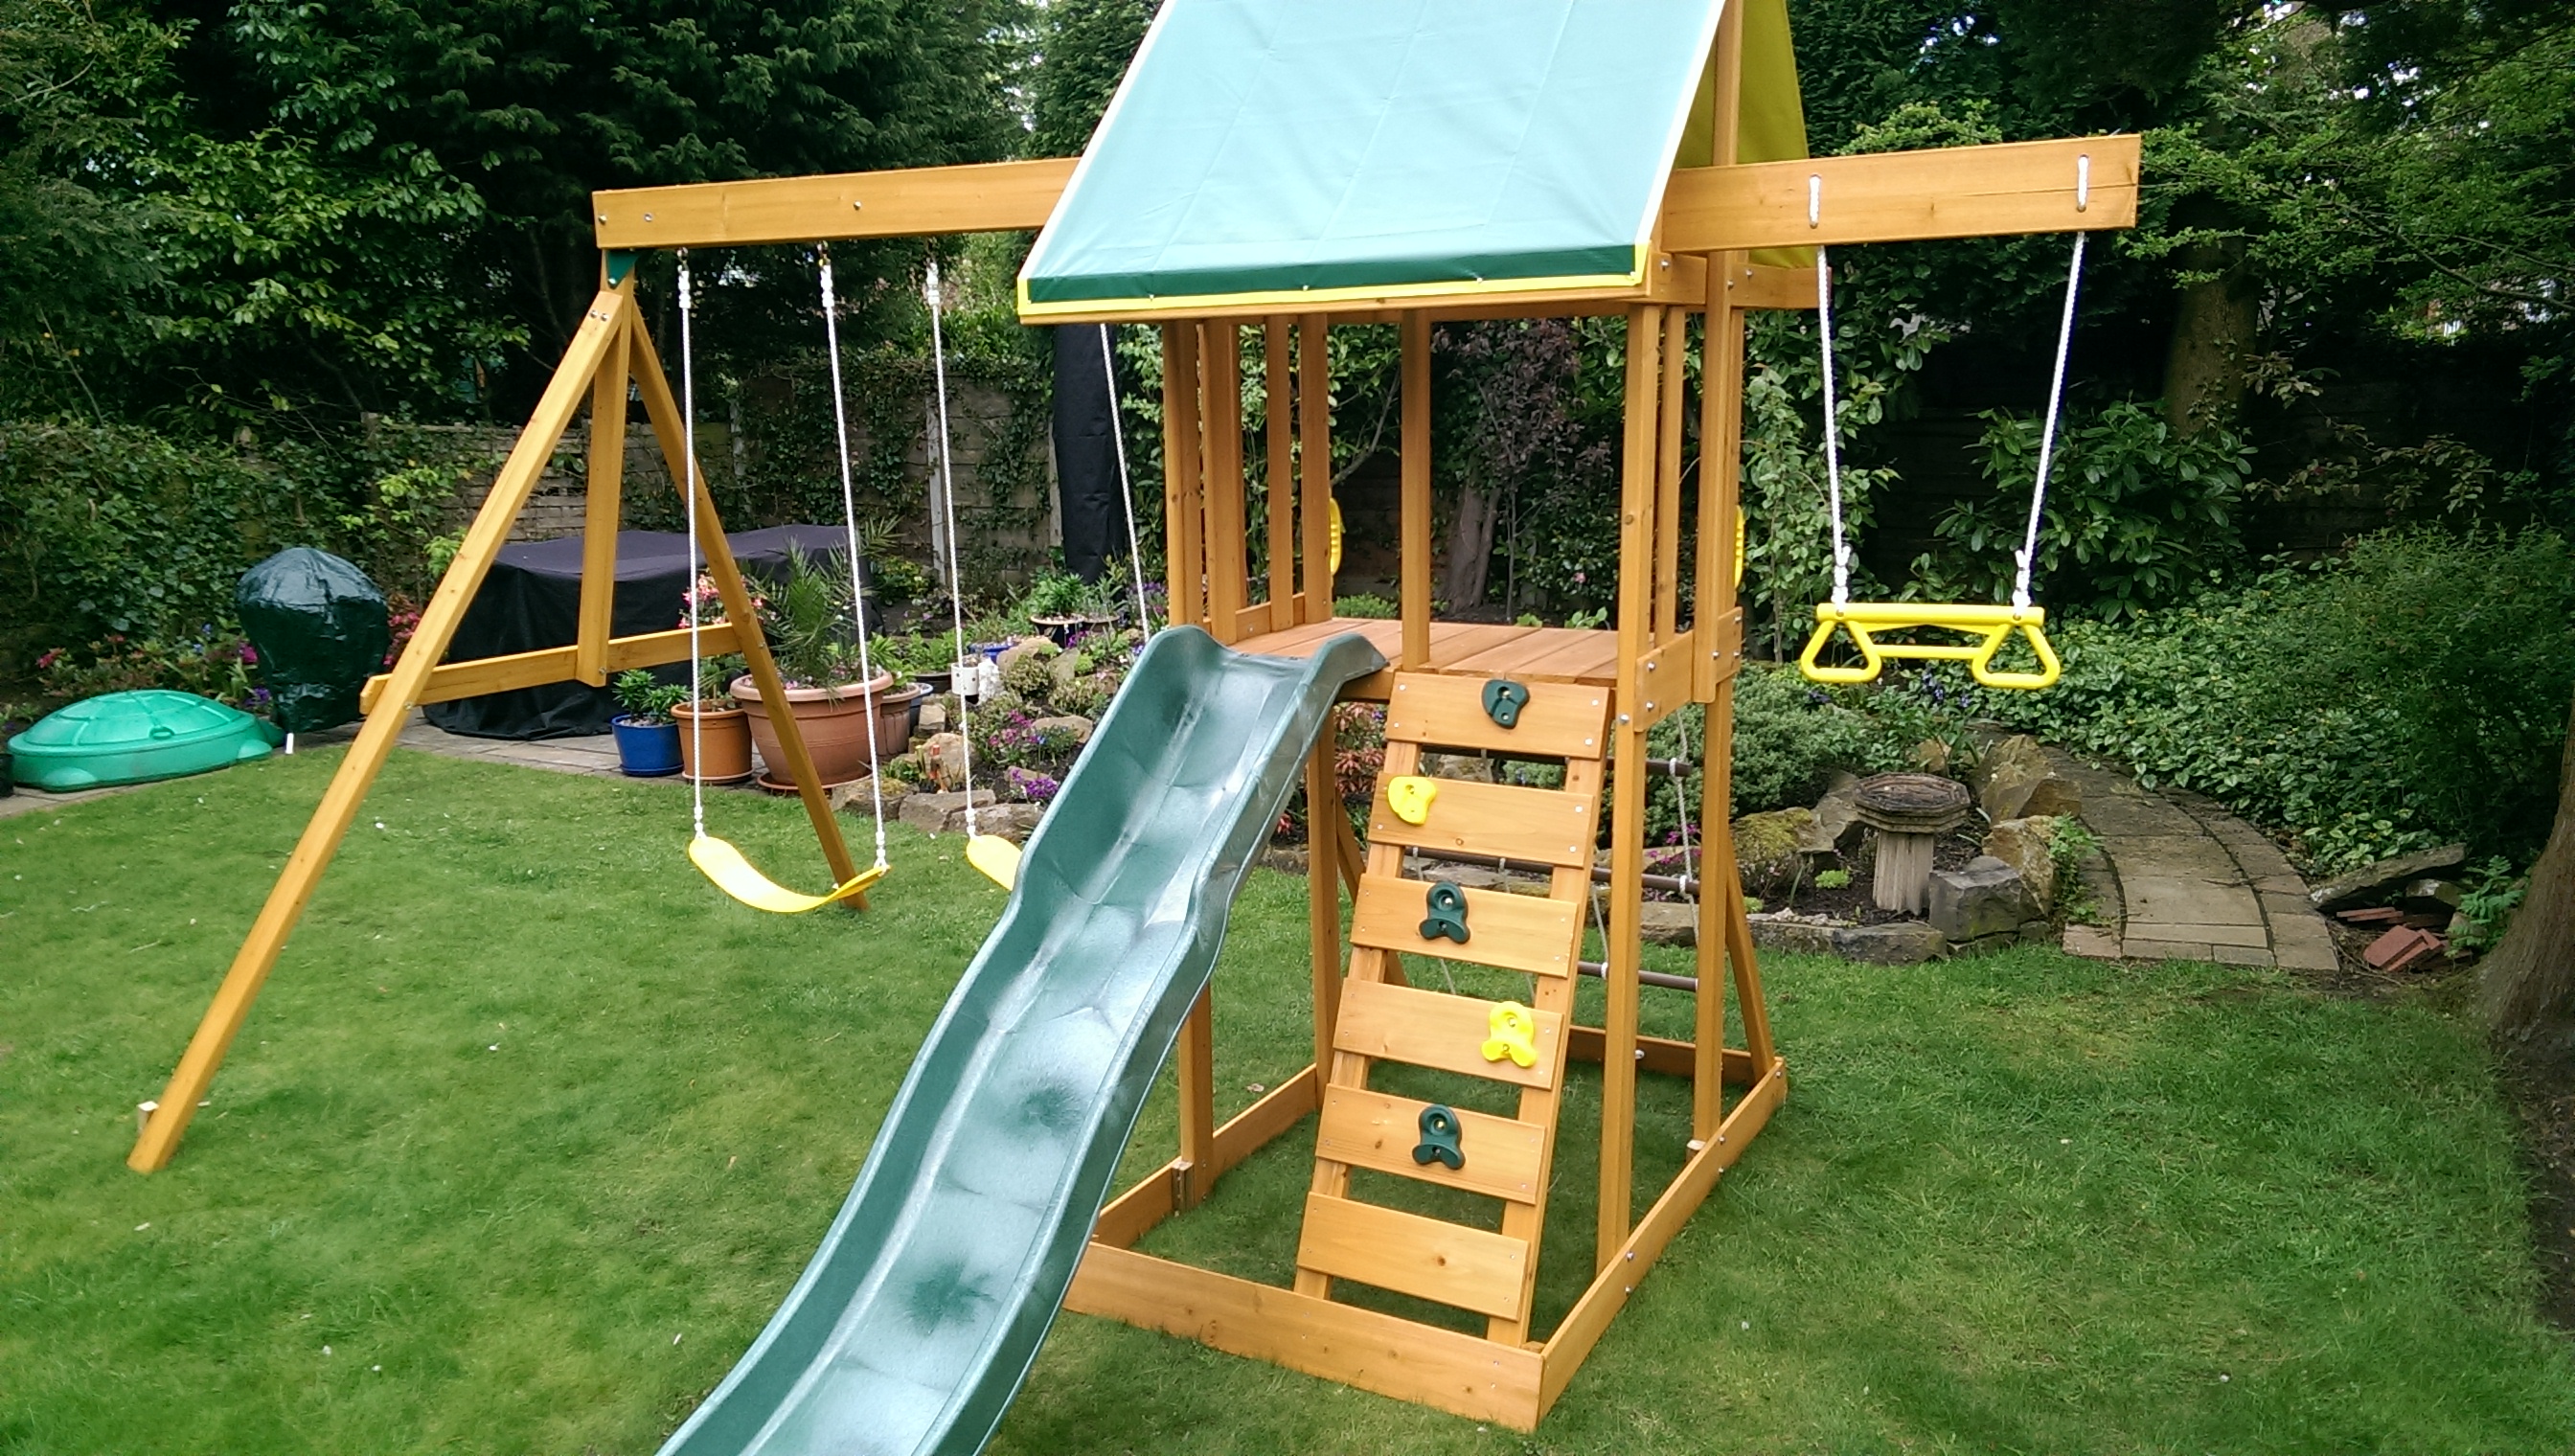 The Meadowvale Climbing Frame from Selwood